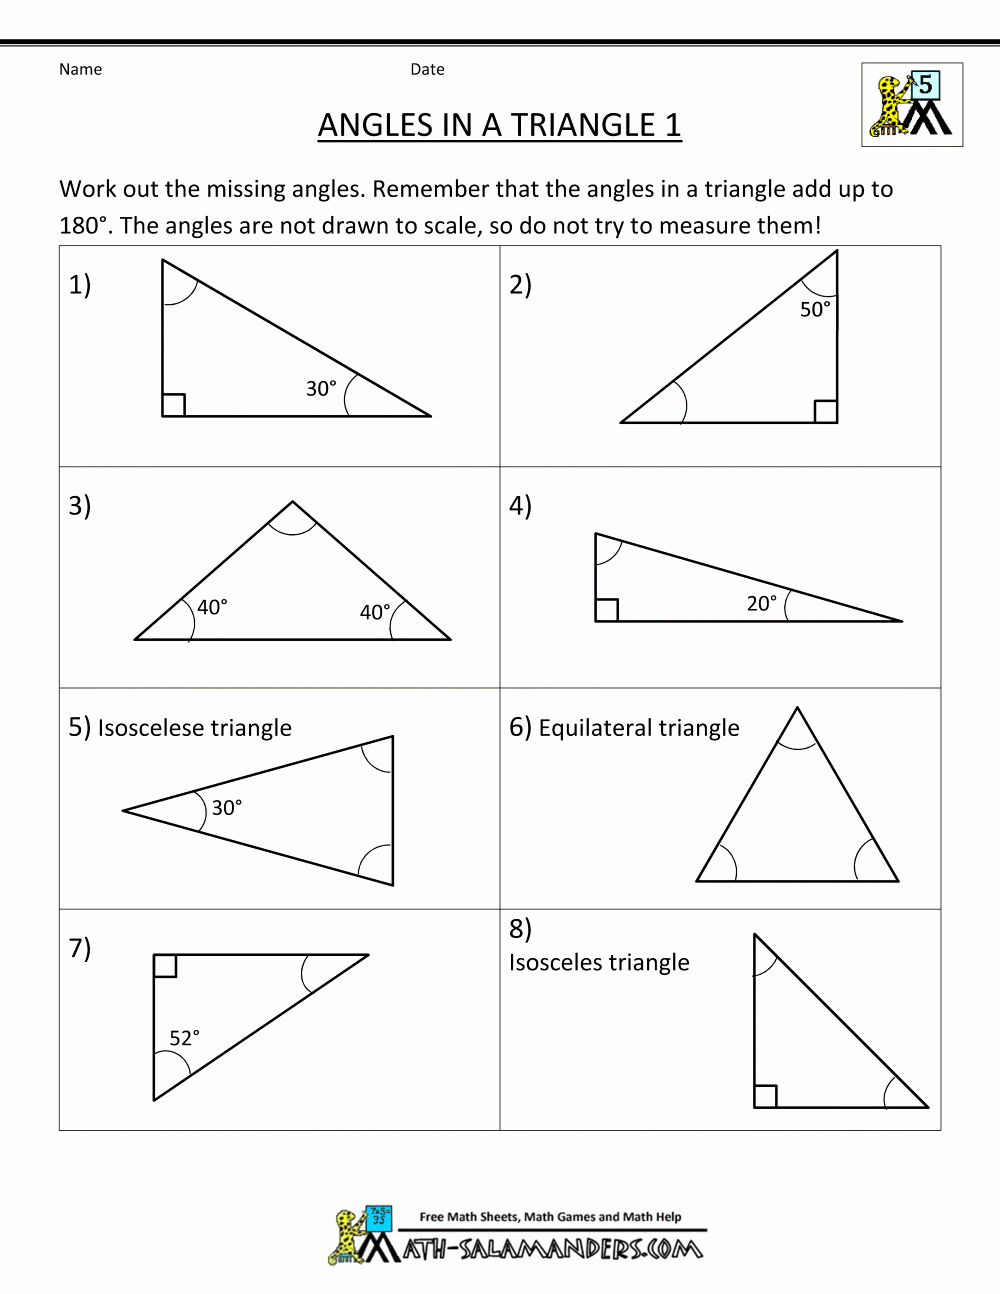 Triangle Interior Angles Worksheet Answers Lovely Interior Angles A Triangle Worksheet the Best